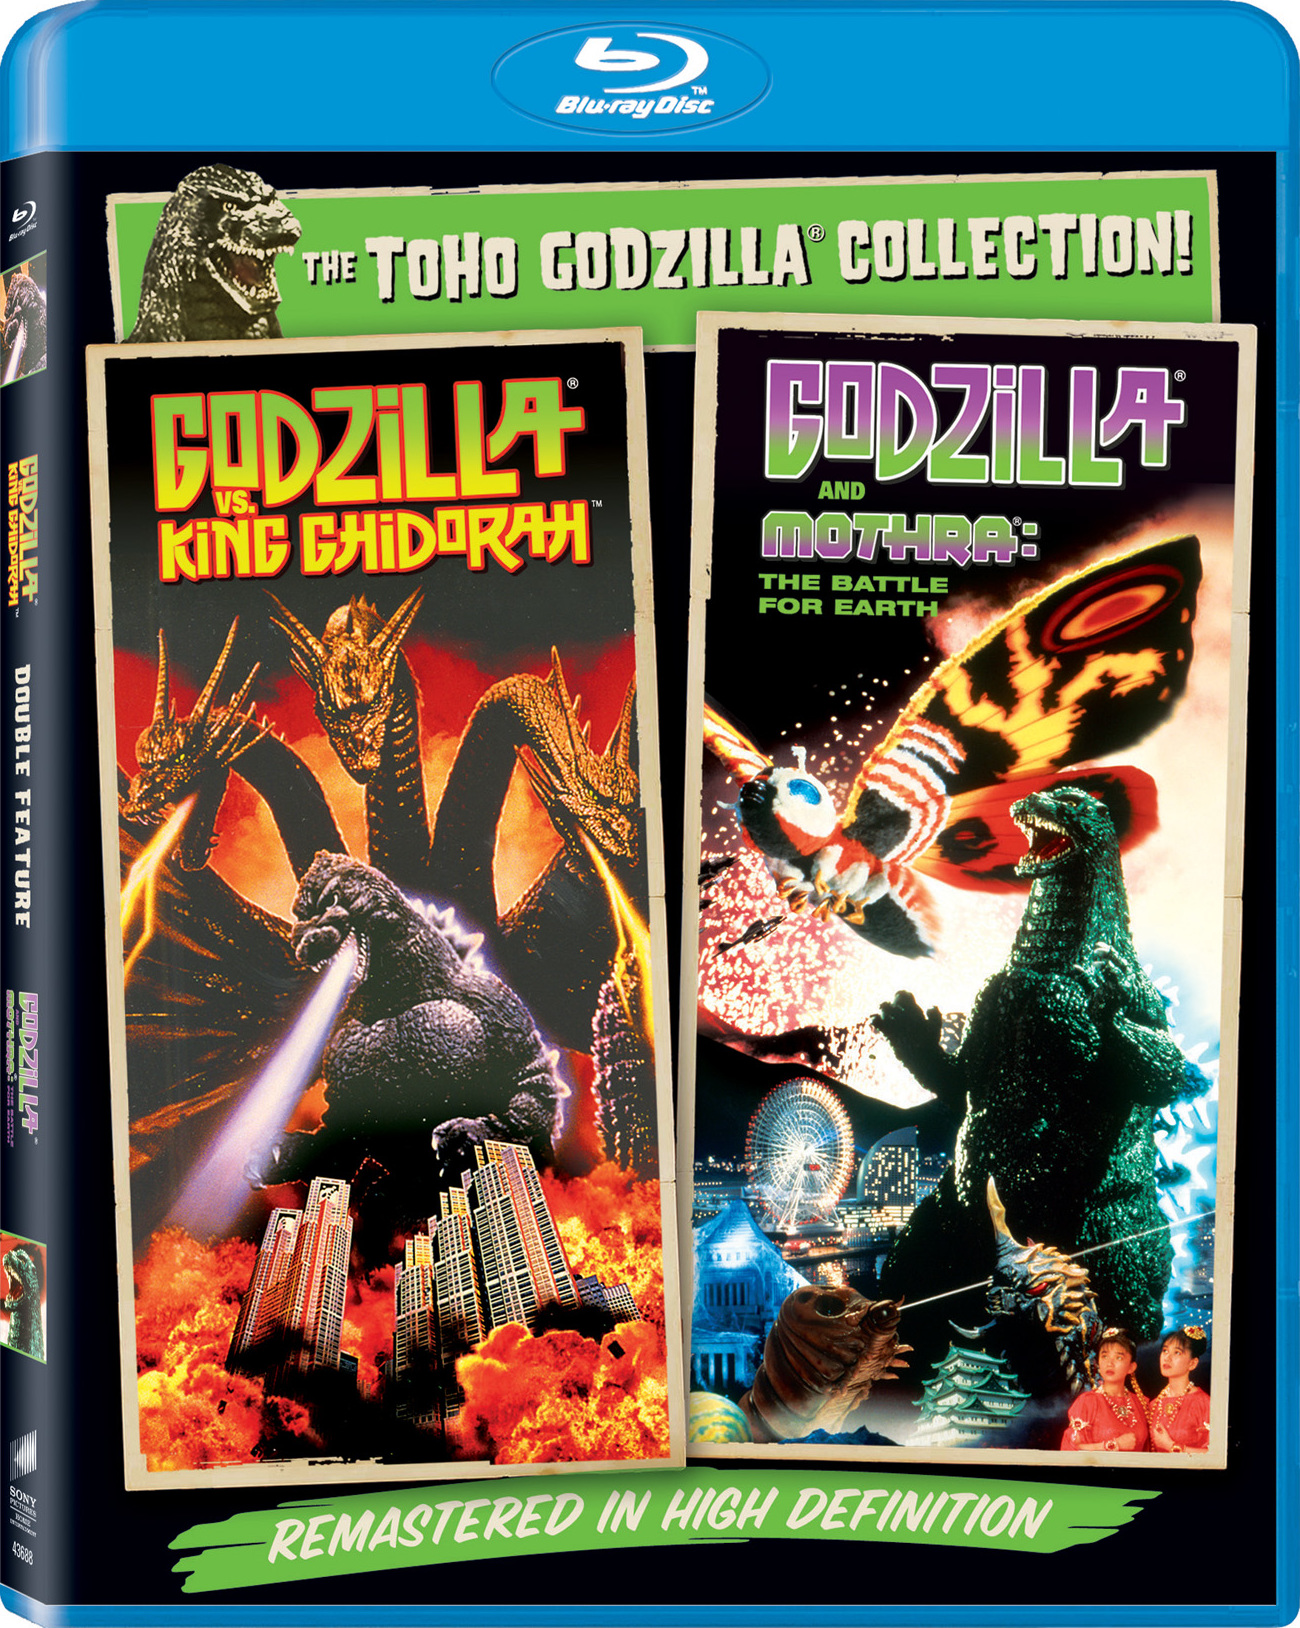 The Toho Godzilla Collection: Upcoming Blu-ray Releases